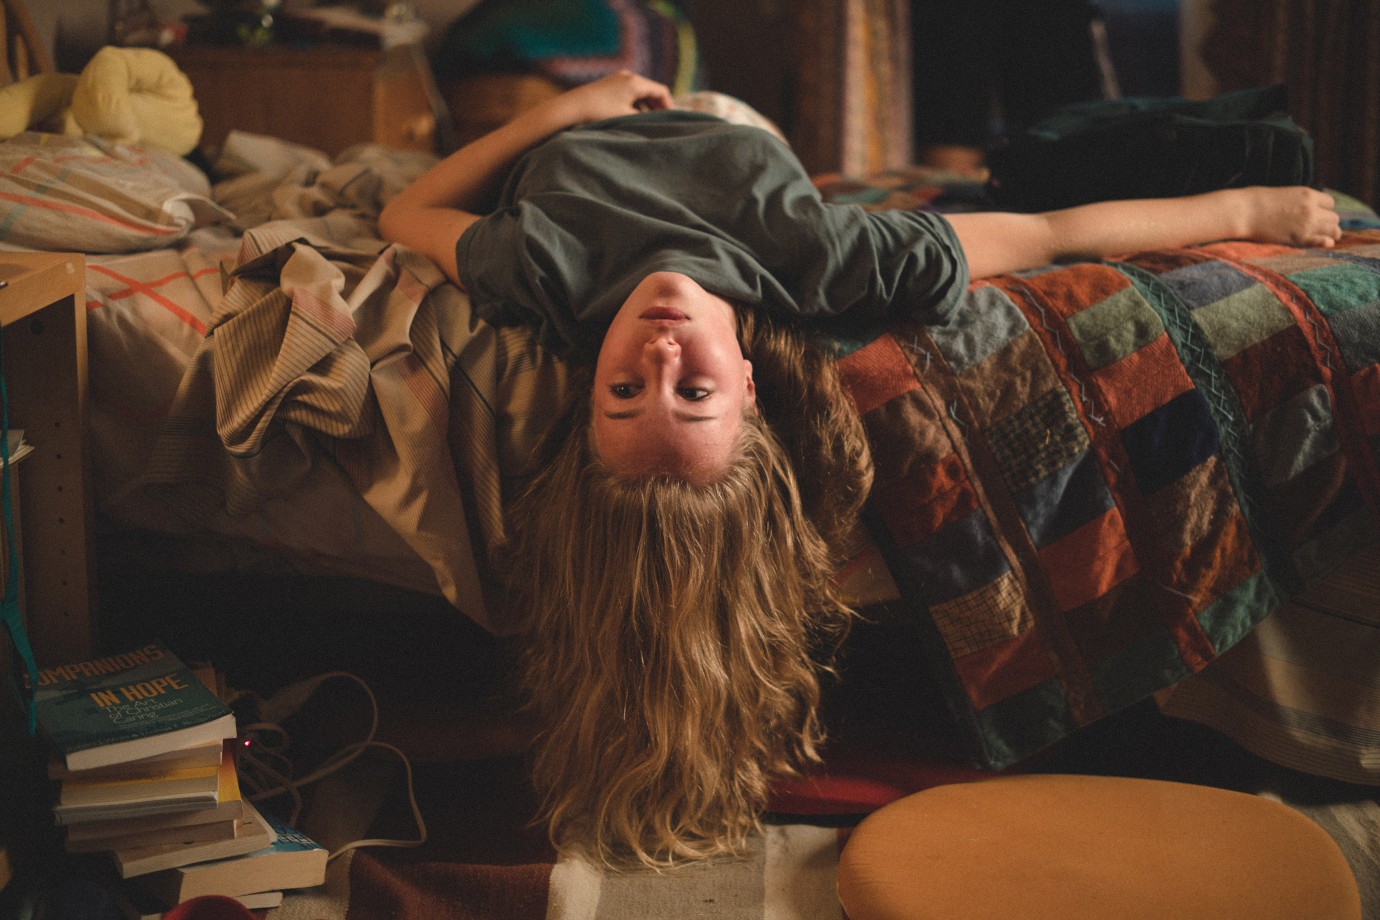 A girl hanging upside down on her bed.